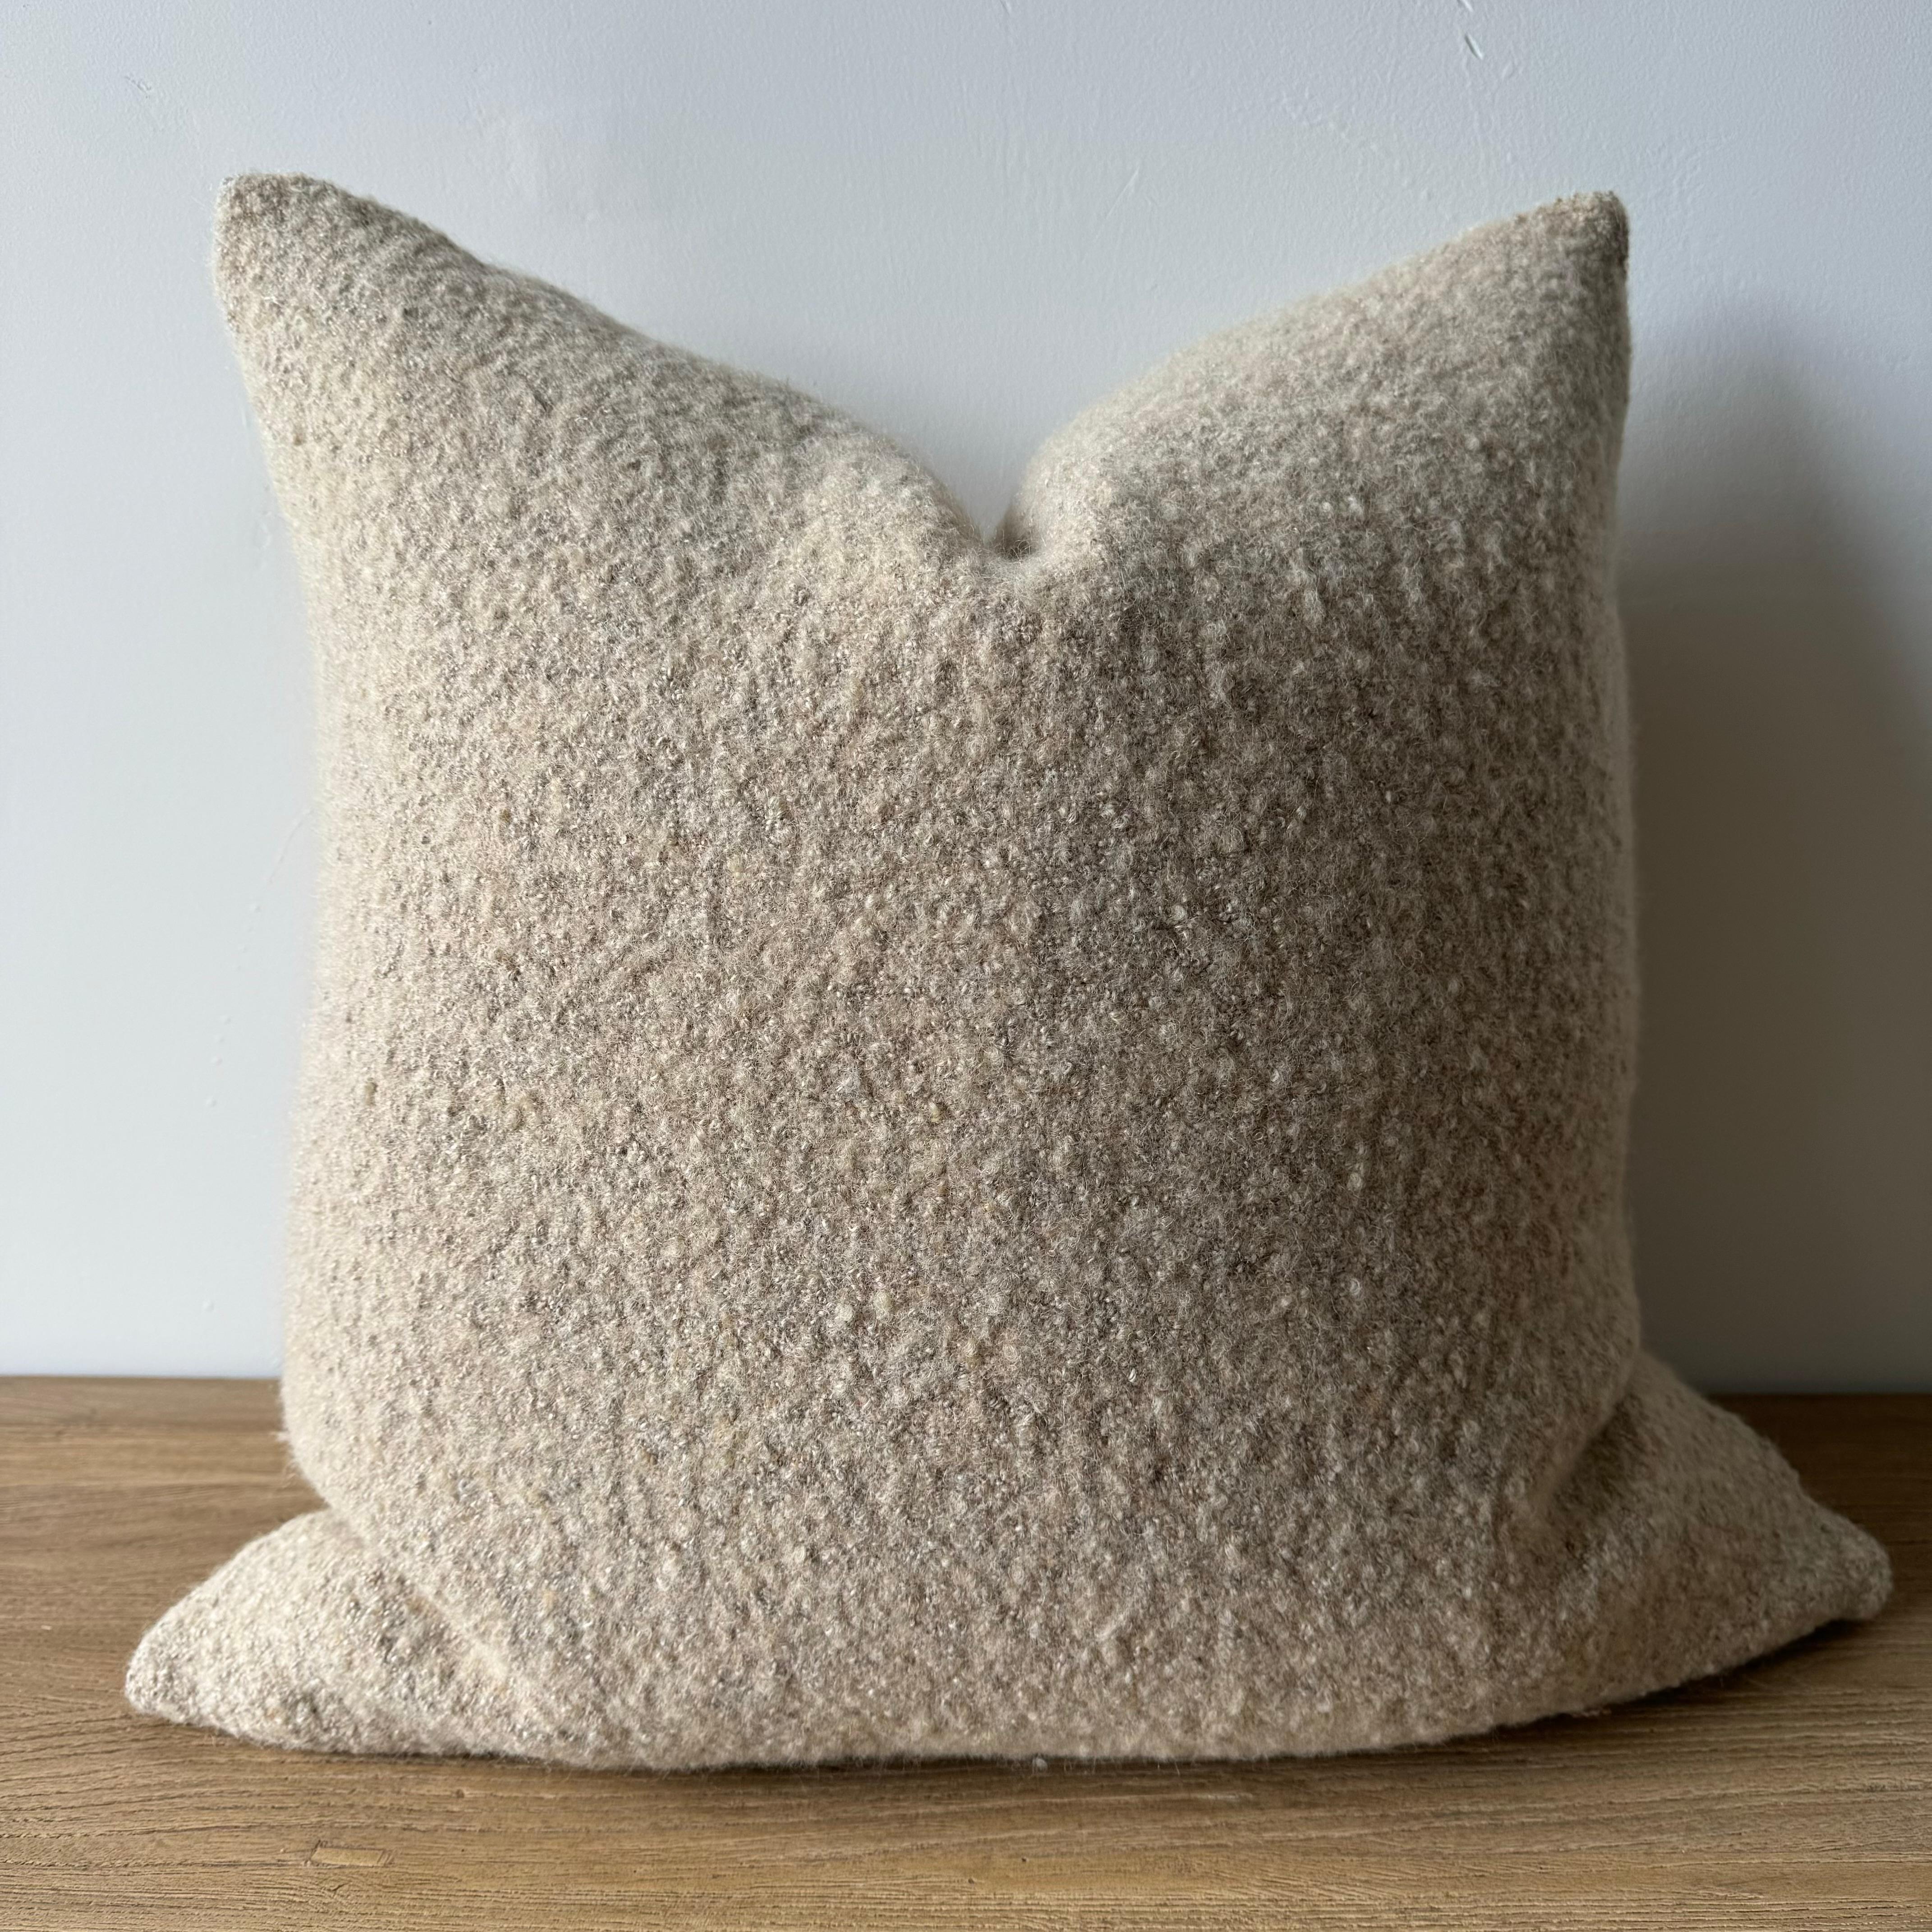 A soft oatmeal flax color, with hints of pale nude tones and natural flax oatmeal woven fibers in a stonewash finish create this luxurious soft pillow. Sewn with an antique brass zipper closure and overlocked edges.
Includes a down/ feather